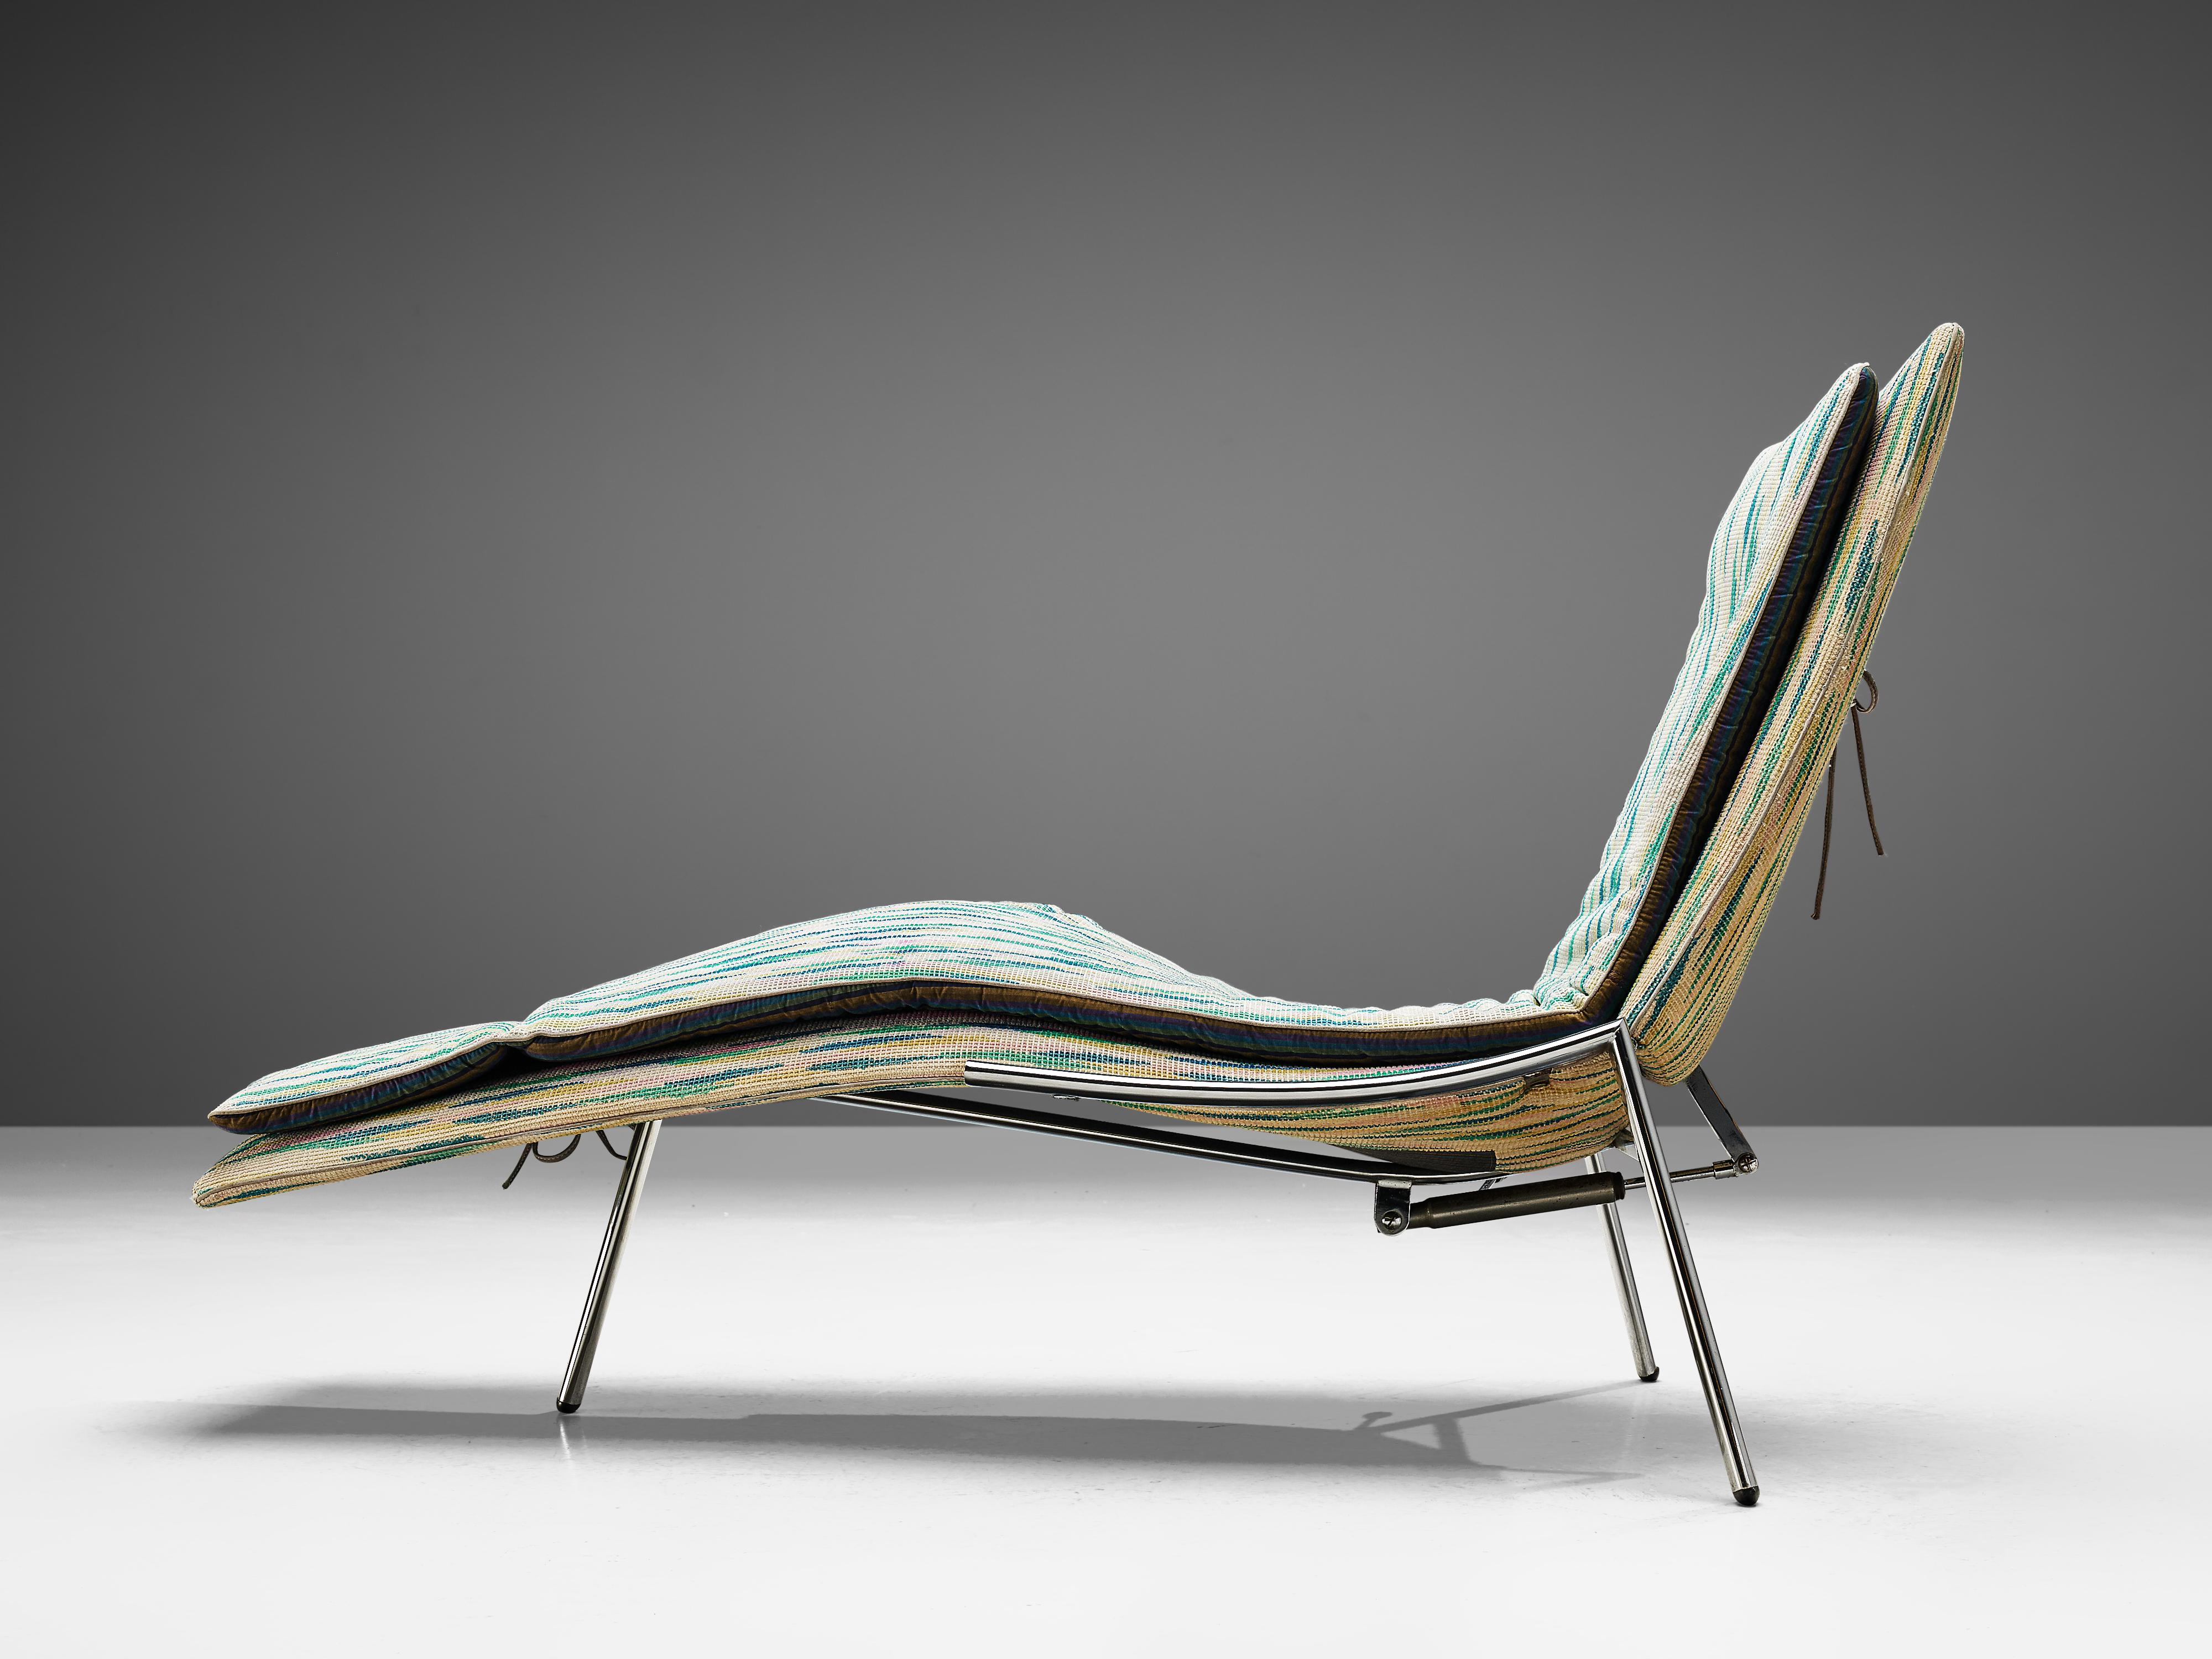 Giovanni Offredi for Saporiti Italia, chaise longue, chrome, textured multicolored upholstery, Italy, 1970s

This wonderful lounge chair are designed bij Giovanni Offredi for the Italian manufacturer Saporiti. The multicolored upholstery make for